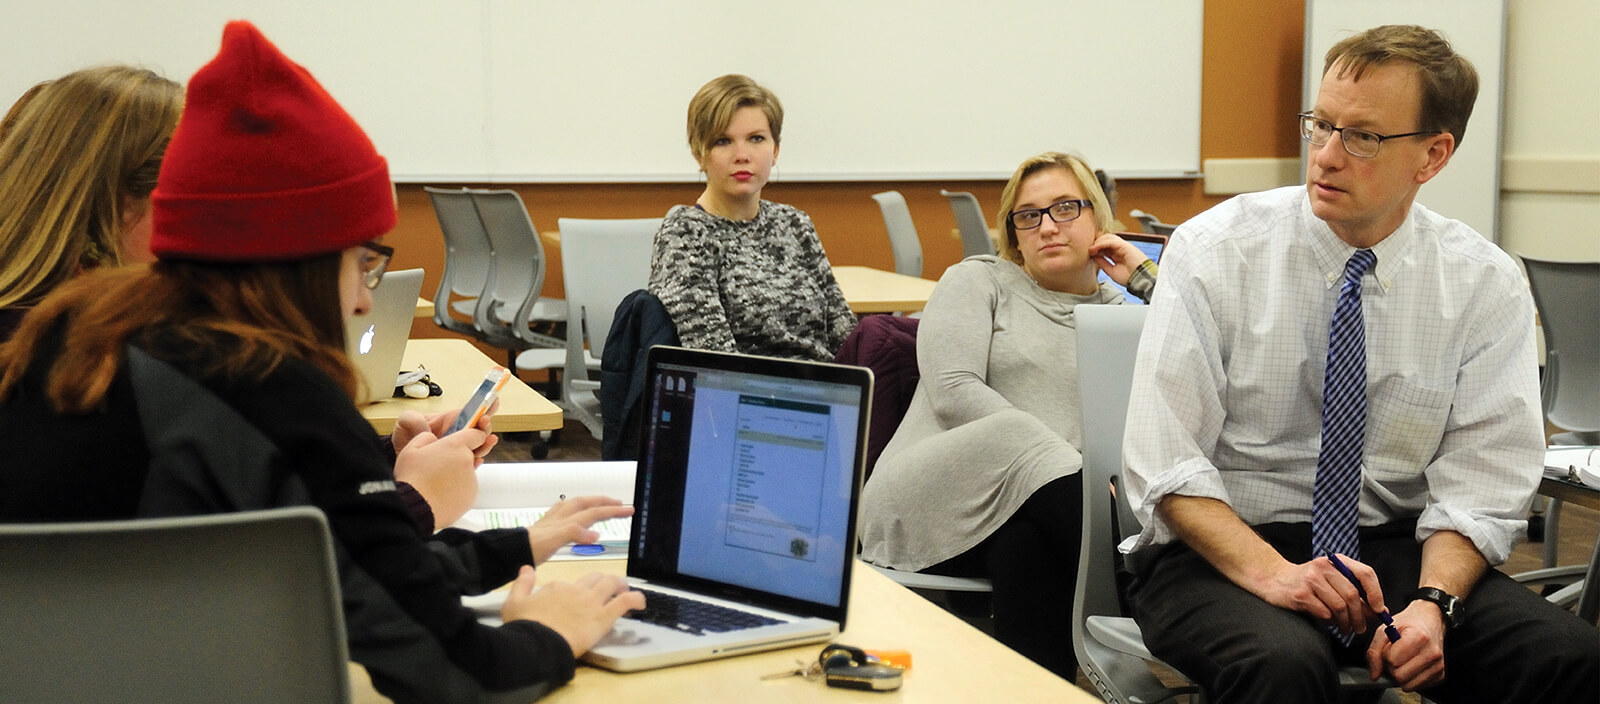 Professor facilitates a discussion group with students in class.